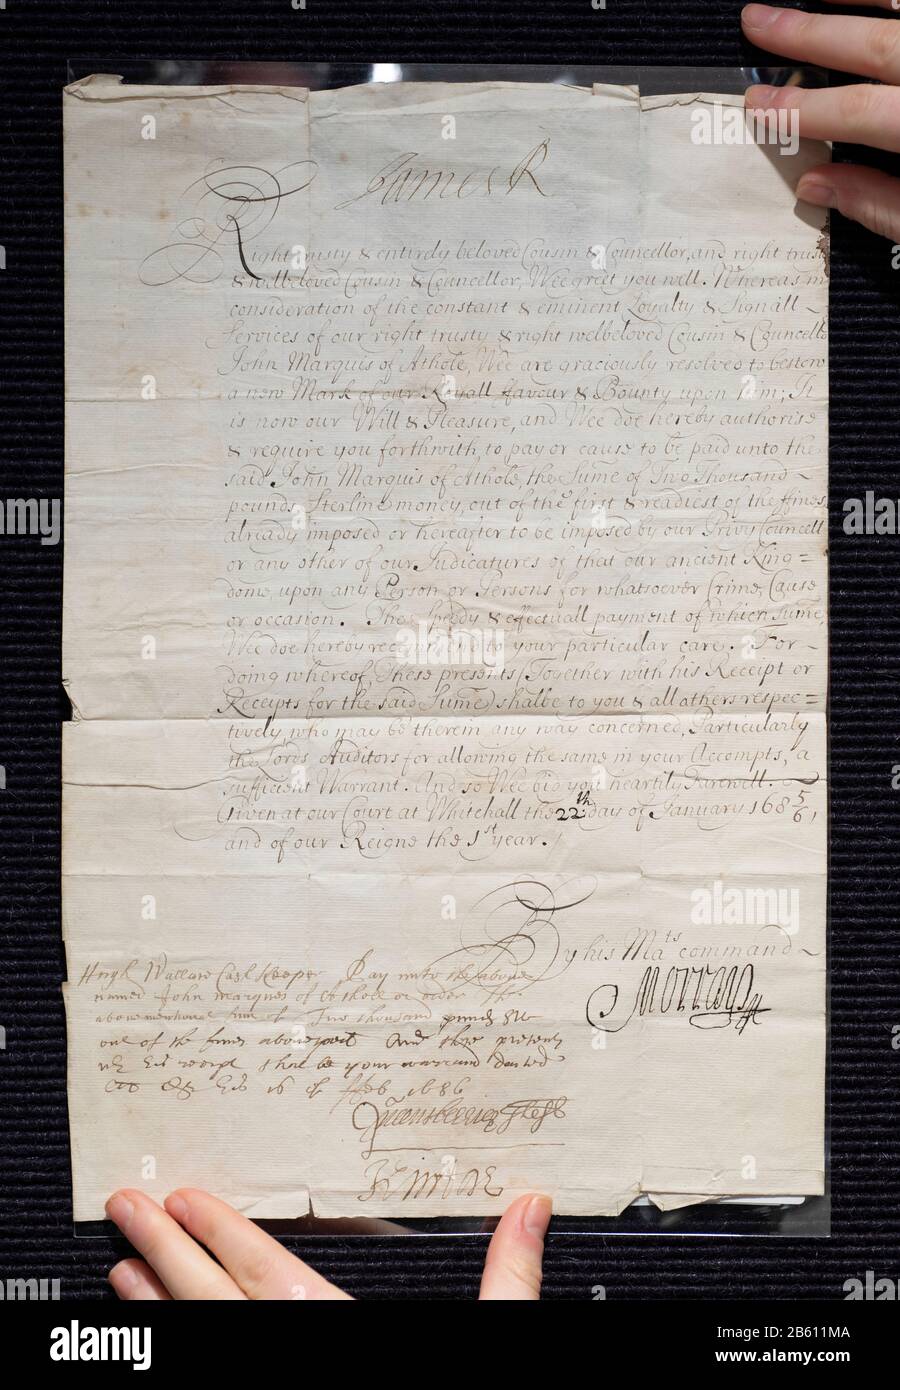 Bonhams, London, UK. 9th March 2020. Fine Books, Atlases, Manuscripts & Historical Photographs on preview prior to the sale in London on 11 March 2020. Image: James II - Scotland. Document signed ('James R') at head, to William, Duke of Queensberry ('our Treasurer Principall') and John, Earl of Kintore ('our Treasurer Deput of our ancient Kingdome of Scotland'), 'Given at our Court at Whitehall', 22 January 1685/6, estimate £800-1,200. Credit: Malcolm Park/Alamy Live News. Stock Photo